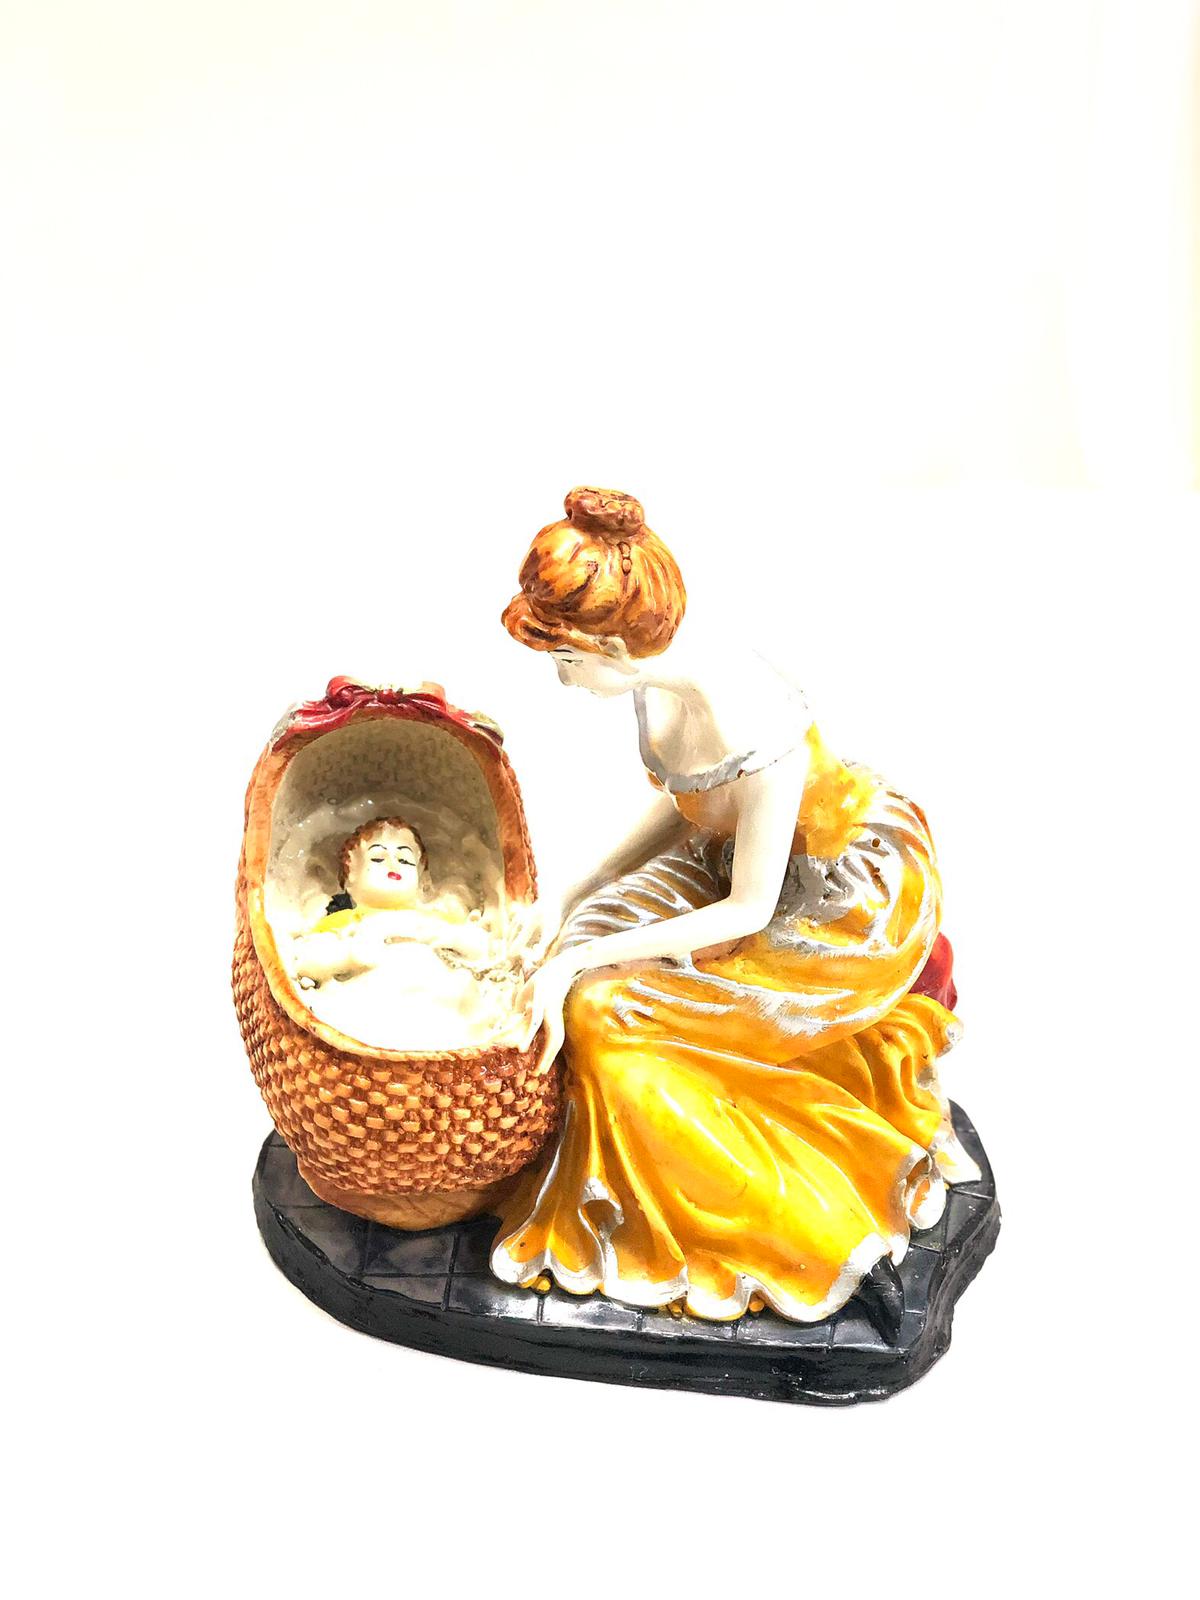 Mother Child Figurine Affectionate Display Artwork Décor Gifting's From Tamrapatra